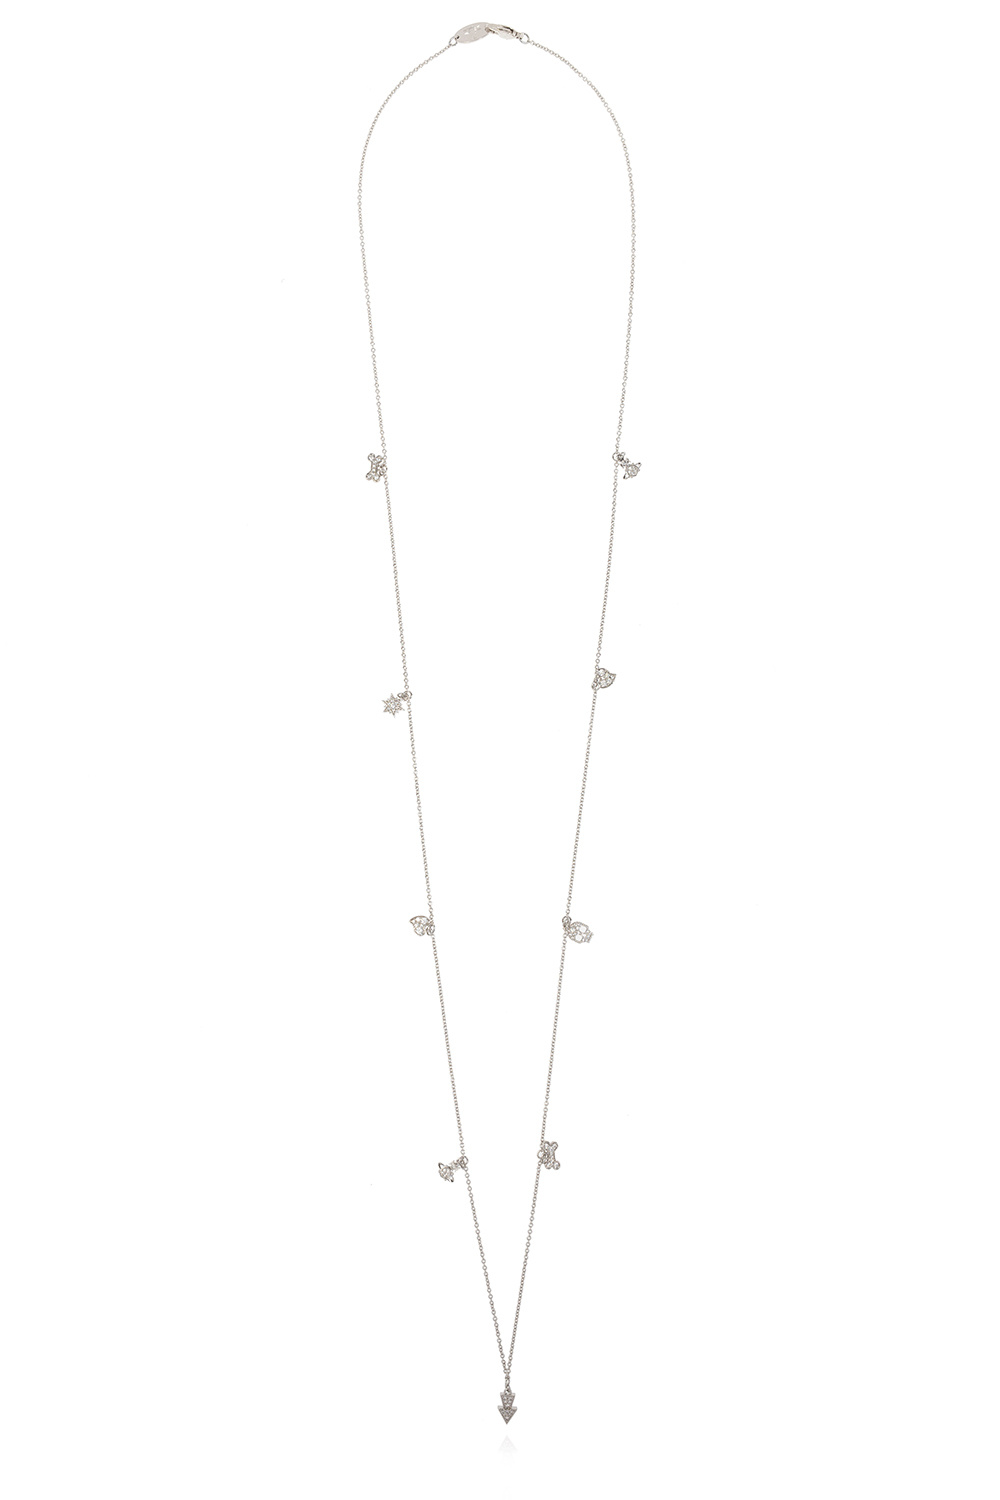 Vivienne Westwood ‘Brandita Long’ necklace with charms